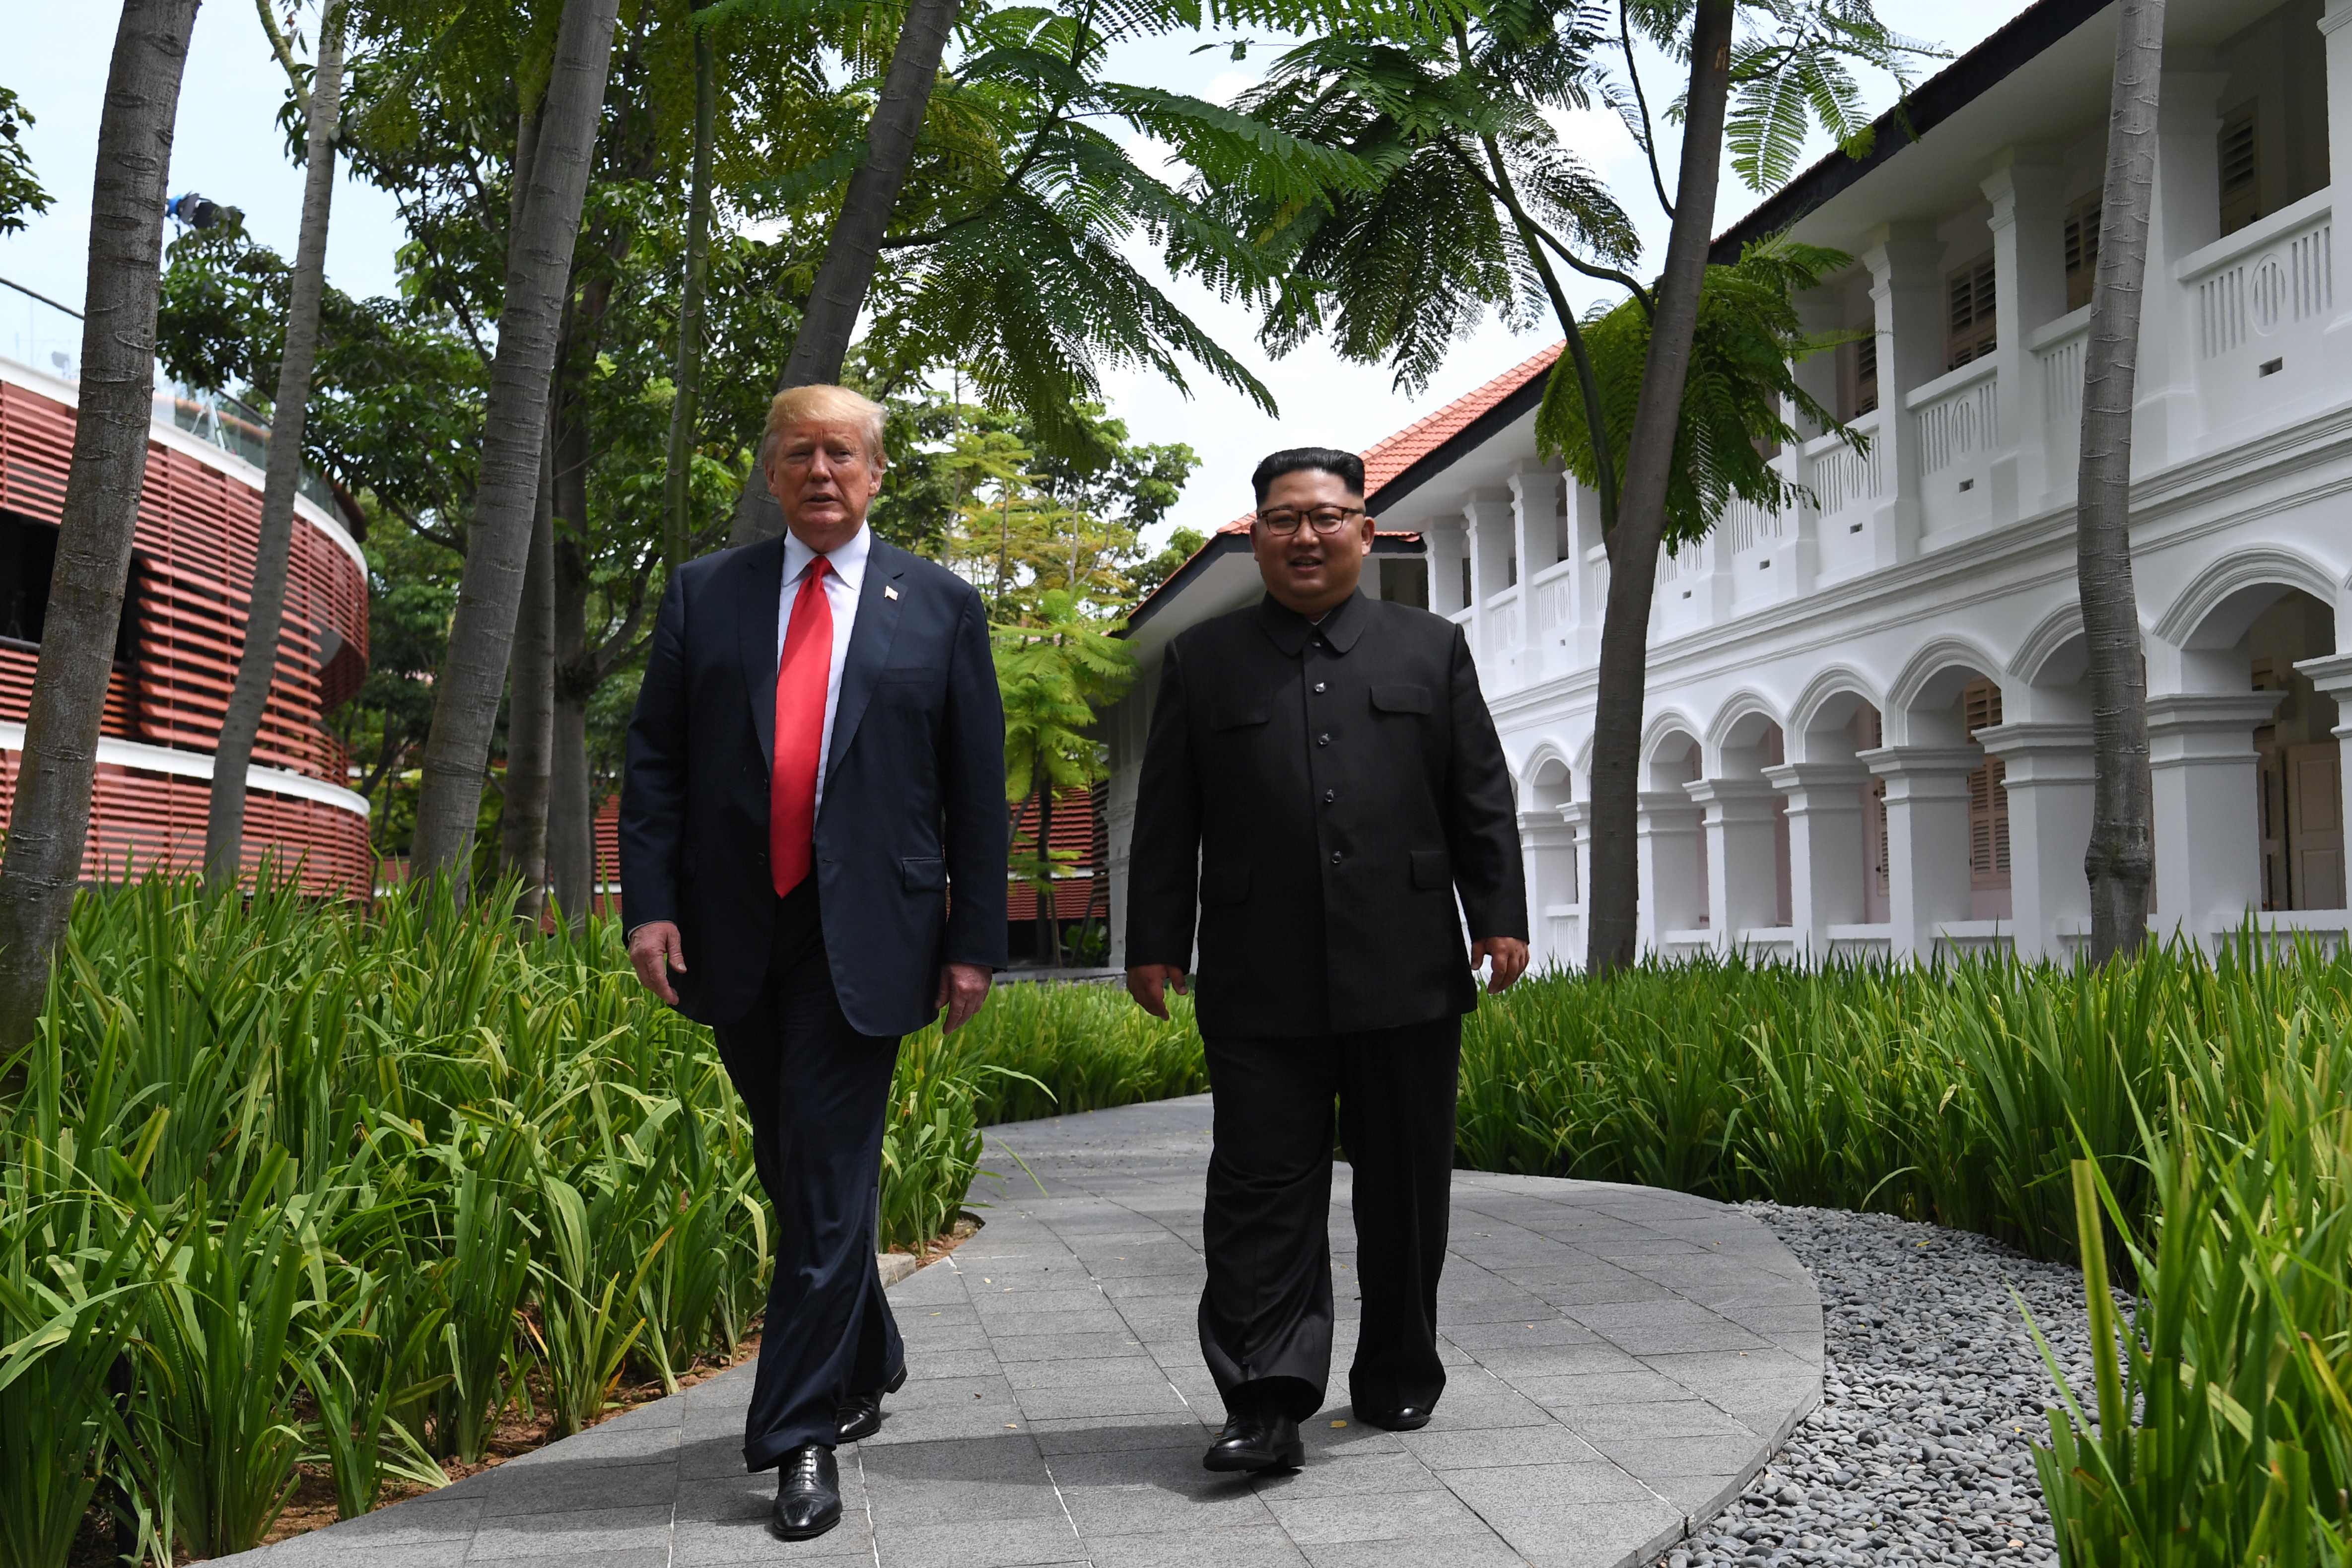 President Donald J. Trump walks with North Korean leader Kim Jong Un during a break in talks at their historic summit in Singapore on June 12, 2018. — Photograph: Saul Loeb/Agence France-Presse/via Getty Images.